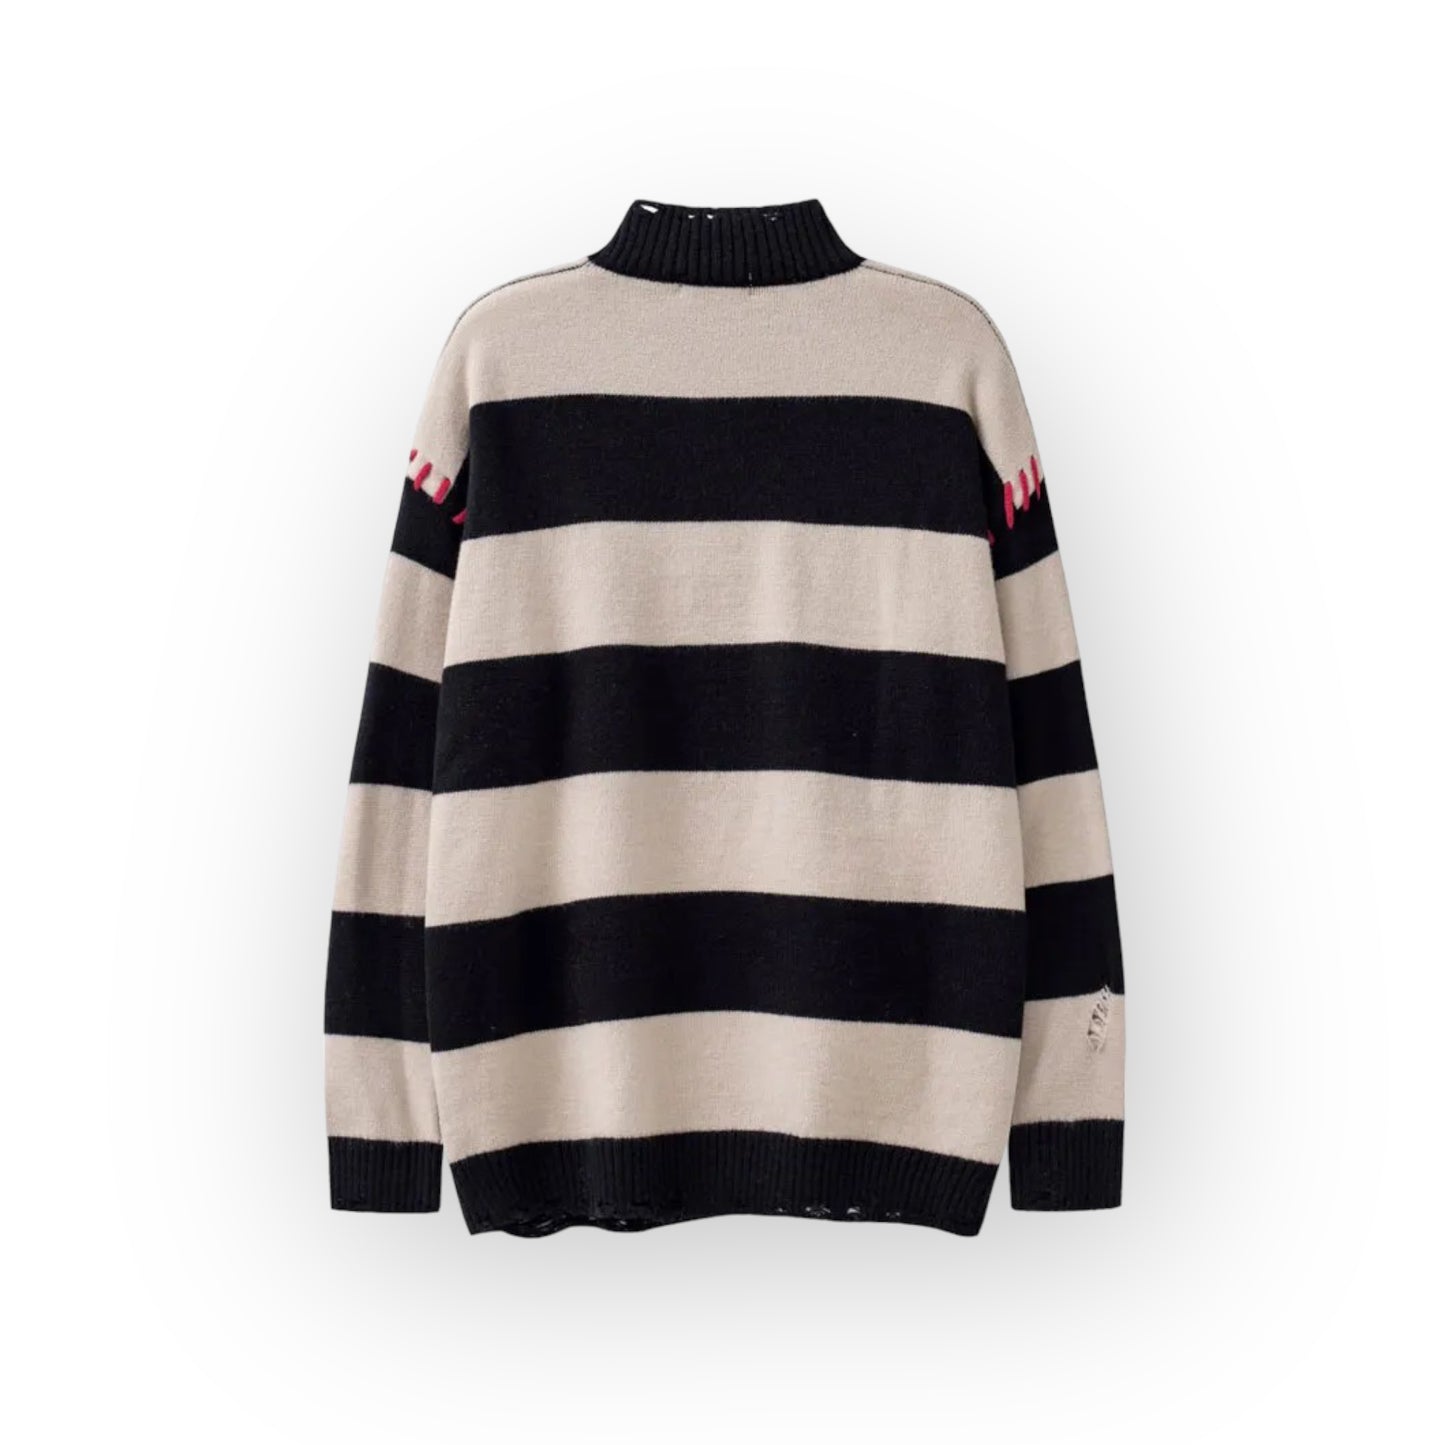 GONTHWID Ripped Knitted Heart Black Striped Holes Jumper